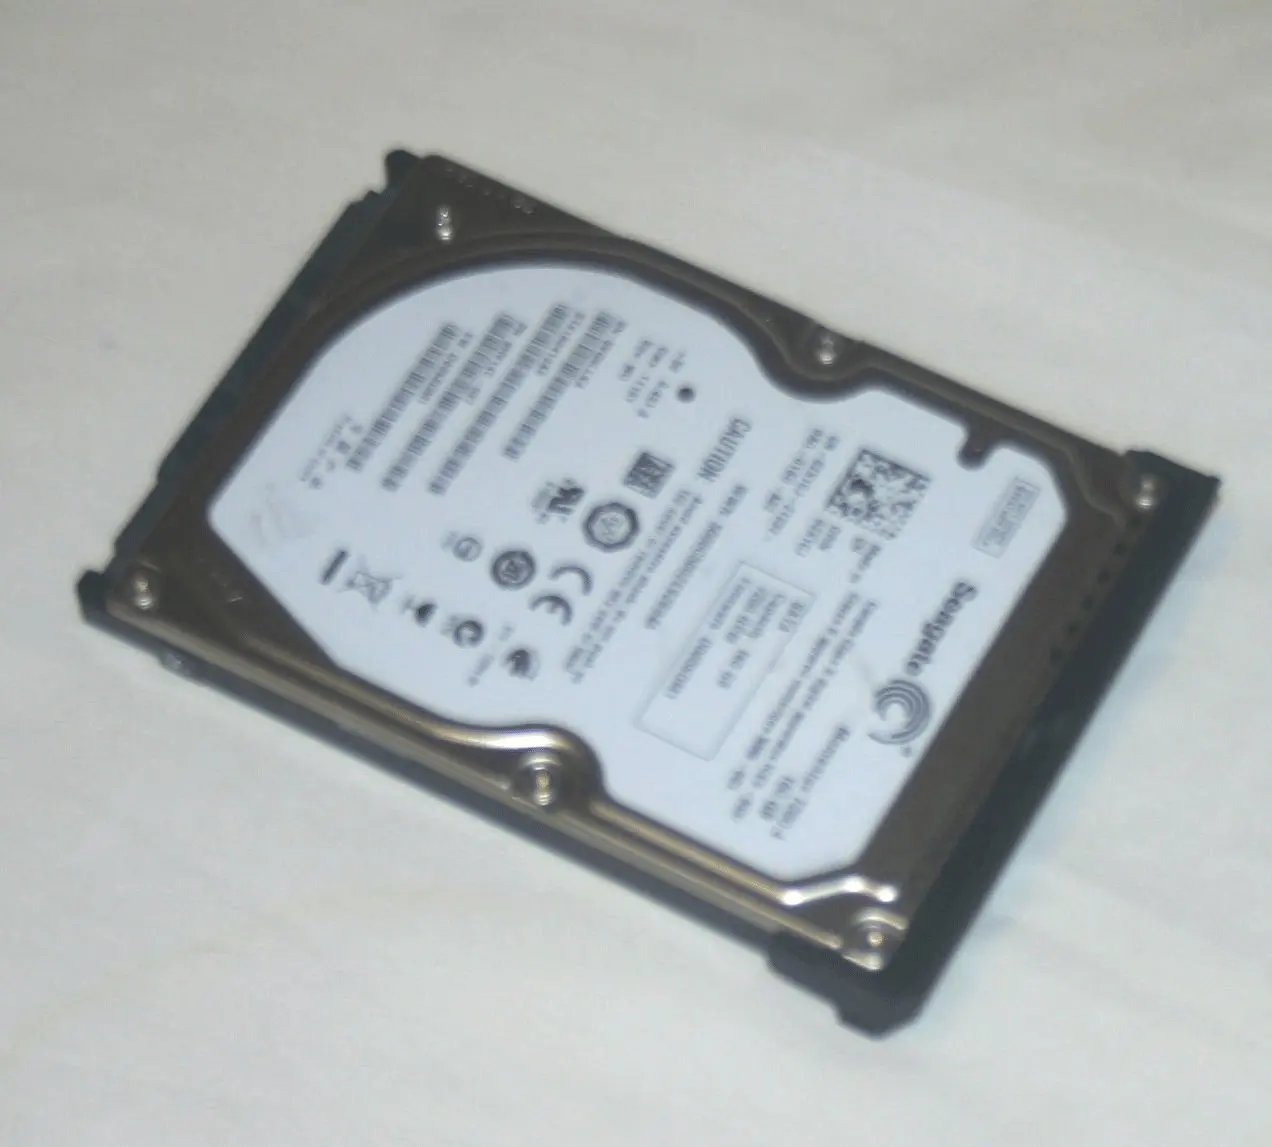 buy hard drive with windows 7 preinstalled